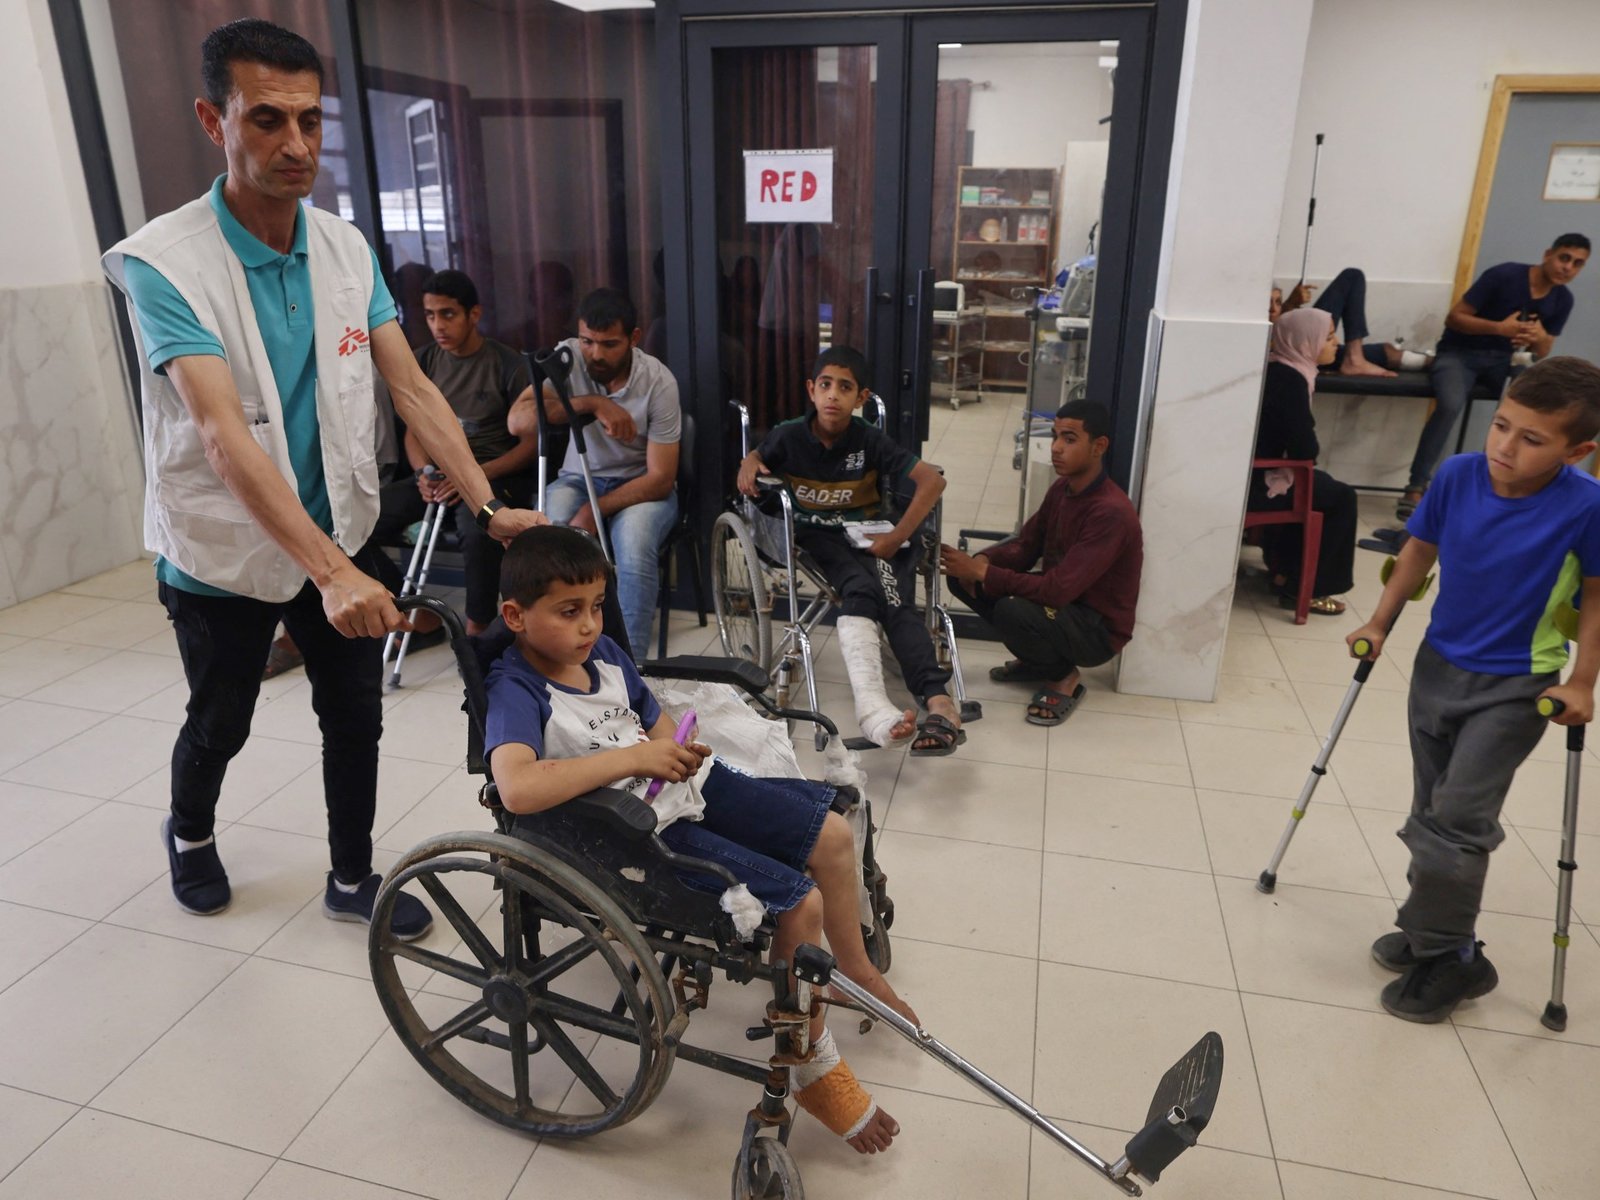 Rafah residents face further danger as Israel hits citys two hospitals | Israel Palestine conflict News